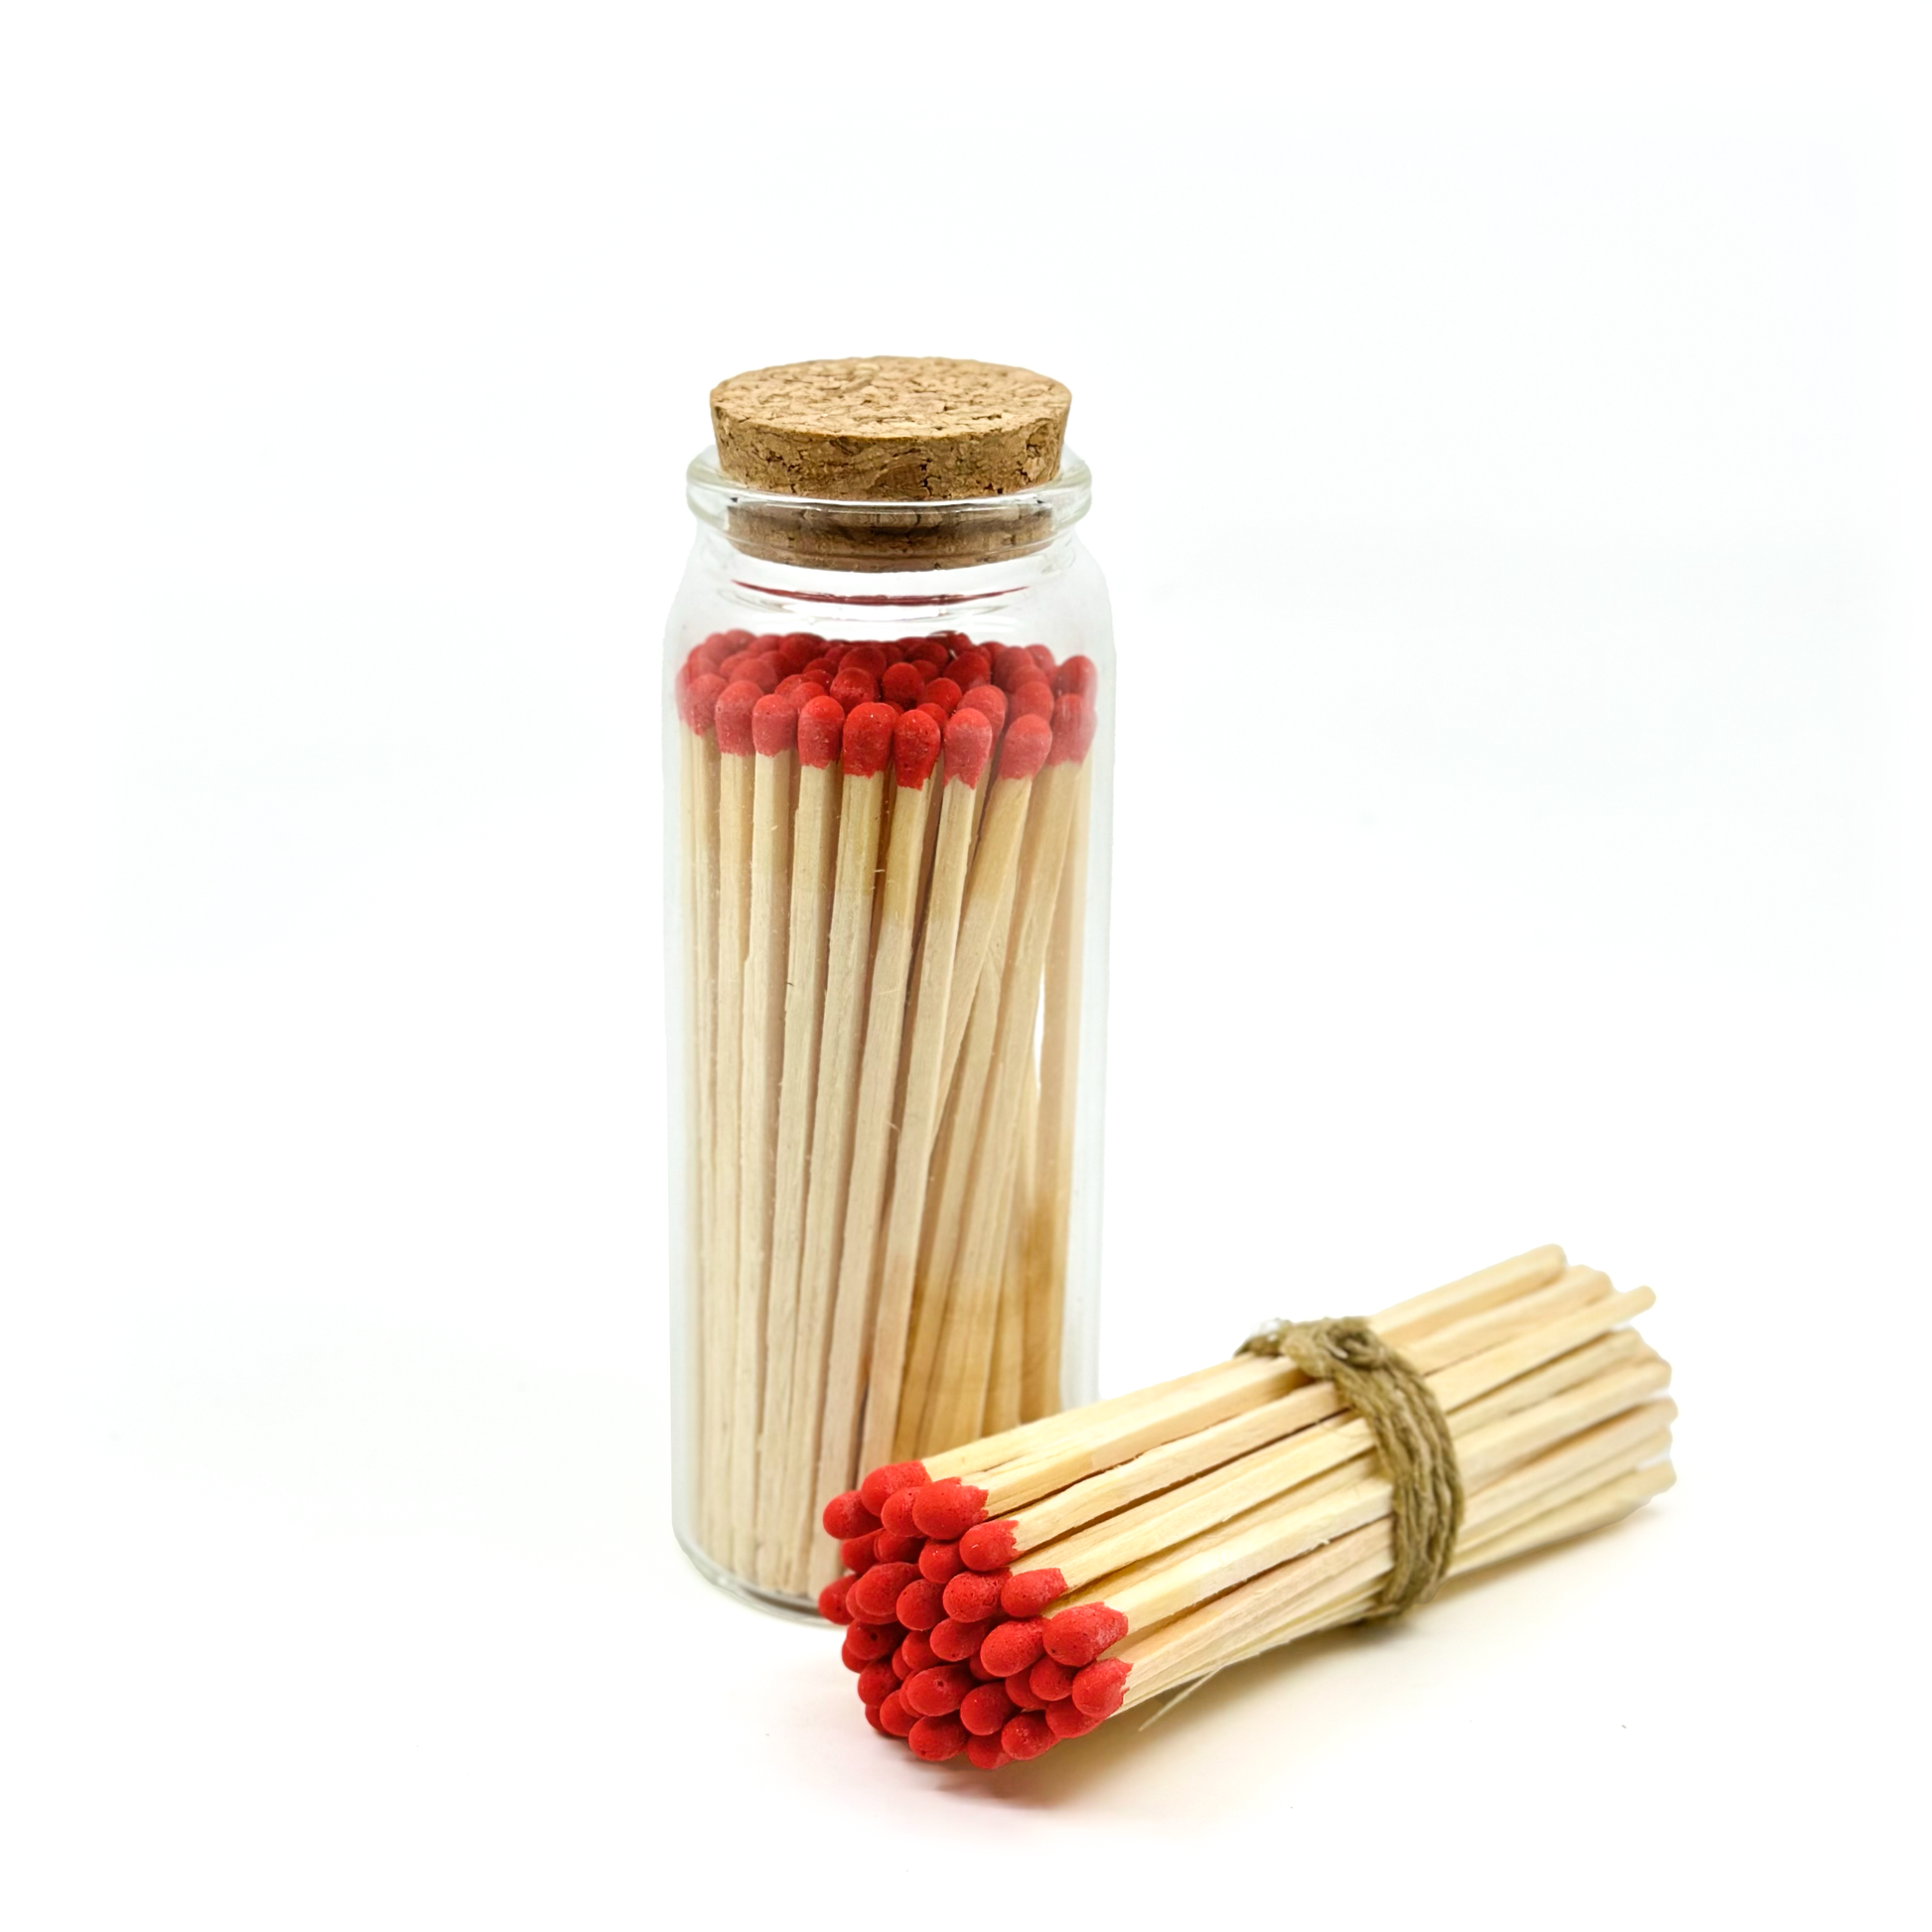 Mixed Colors Safety Matches in Jar - Strike On Bottle Glass Jar 4 Inc –  Chandler Studio